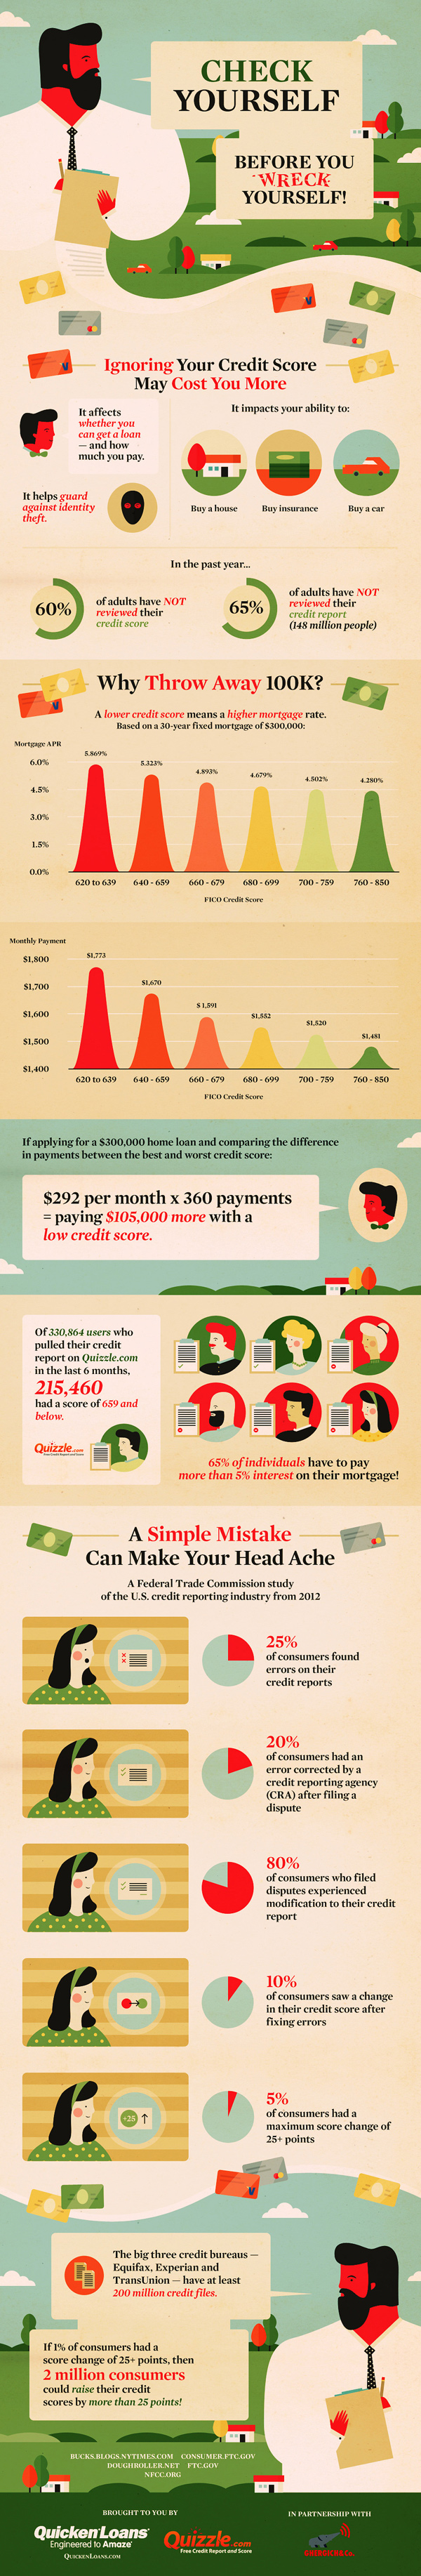 Consequences of Low Credit Score-Infographic